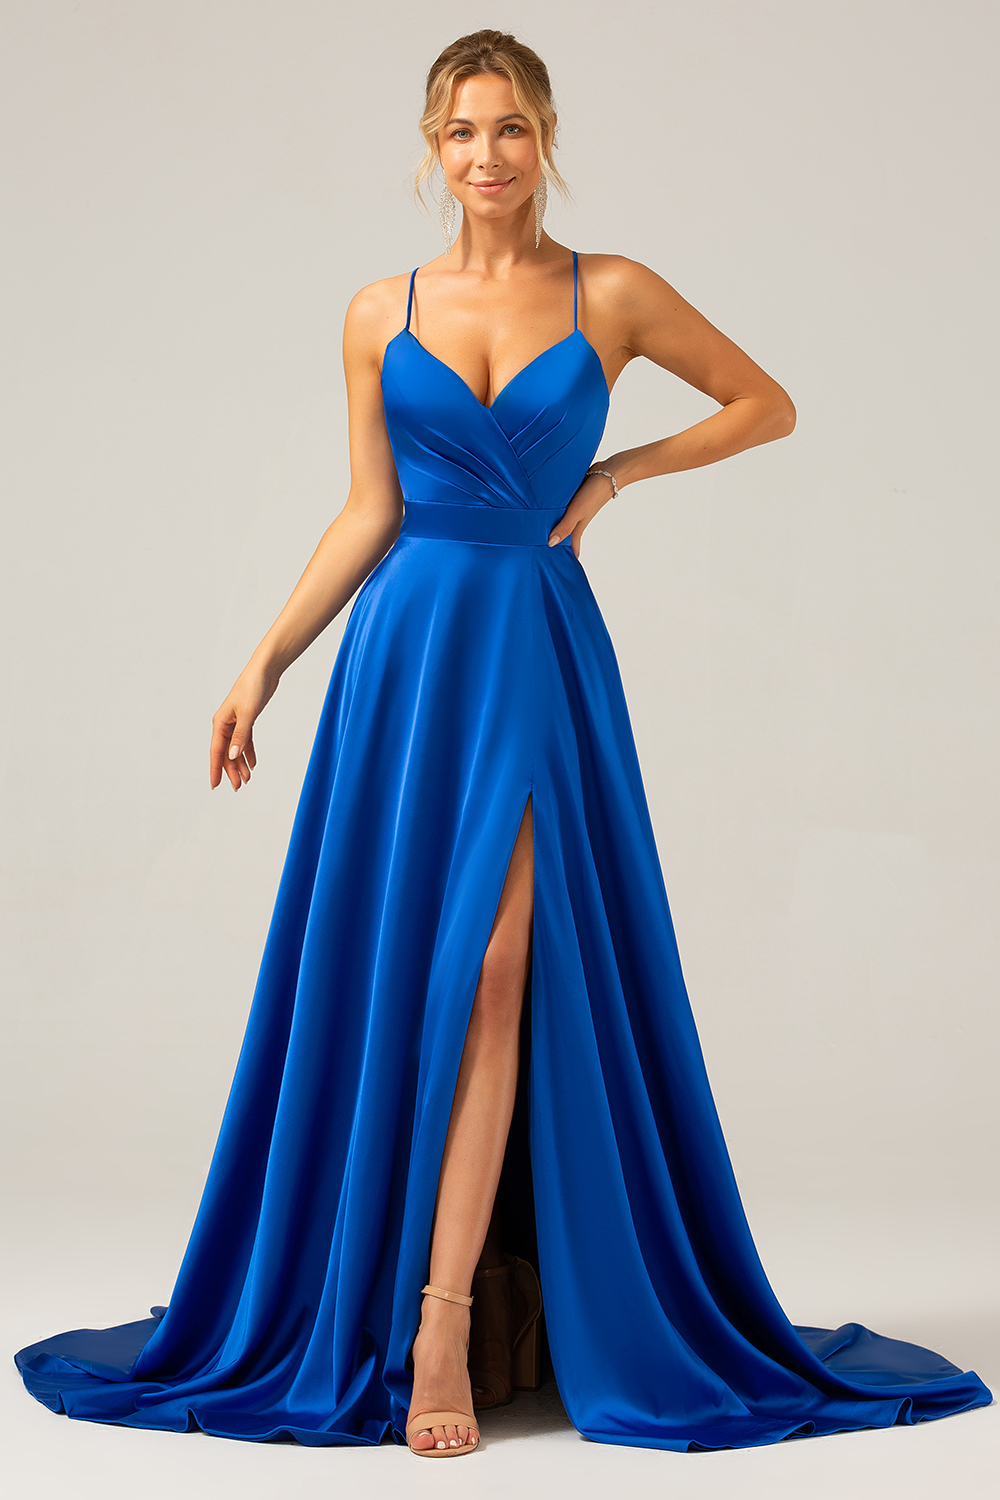 Leely Women Royal Blue Long Prom Dress Satin Spaghetti Straps Party Evening Dress with Slit